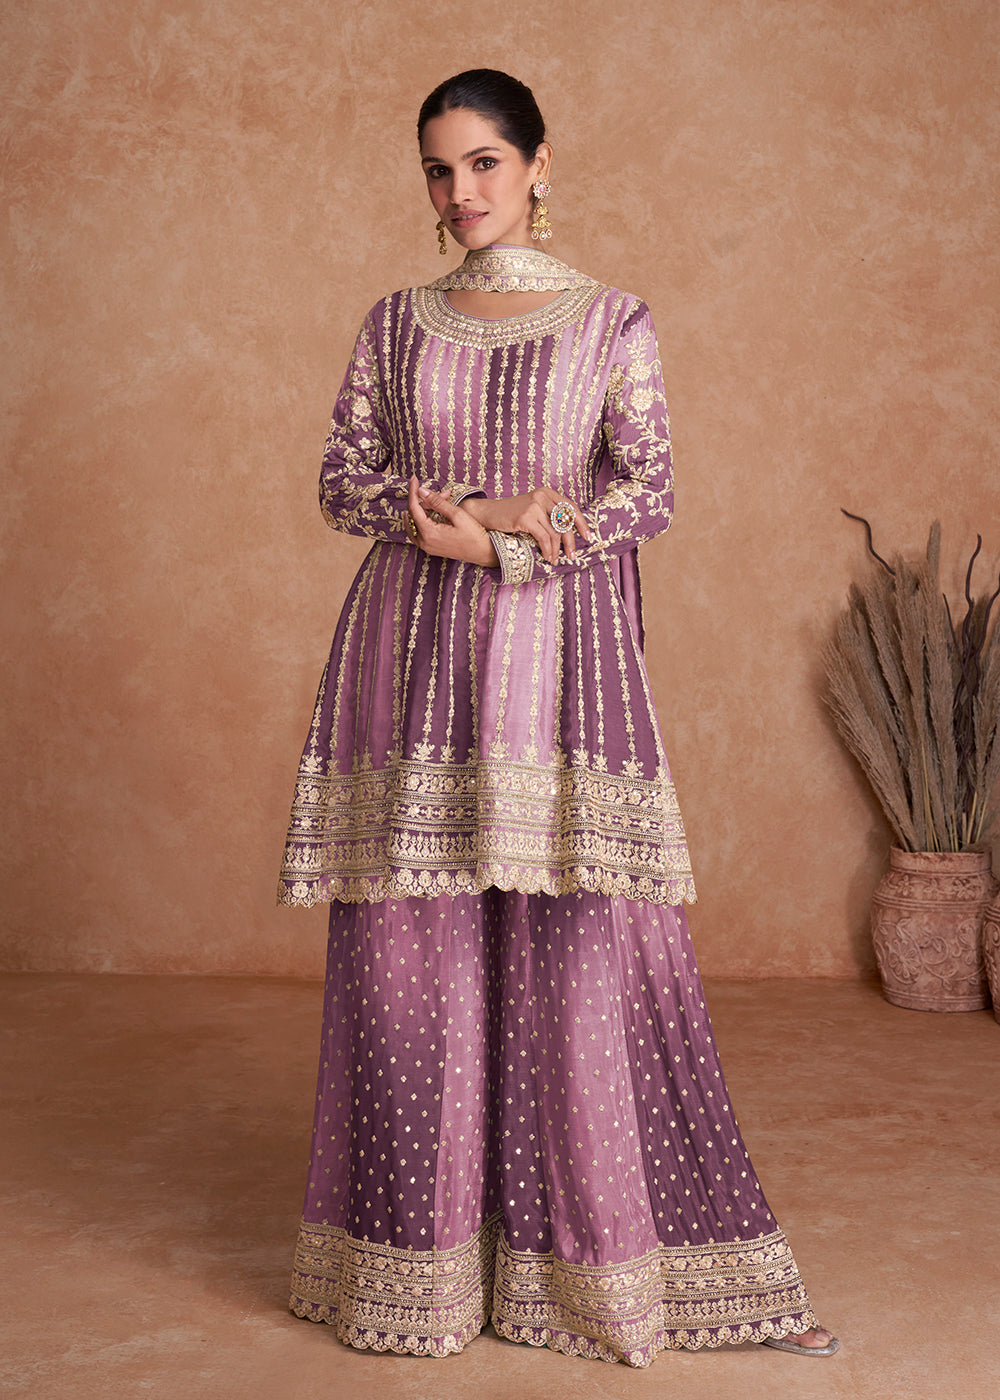 Shop Now Traditional Purple Embroidered Wedding & Reception Wear Gharara Suit Online at Empress Clothing in USA, UK, Canada, Italy & Worldwide.